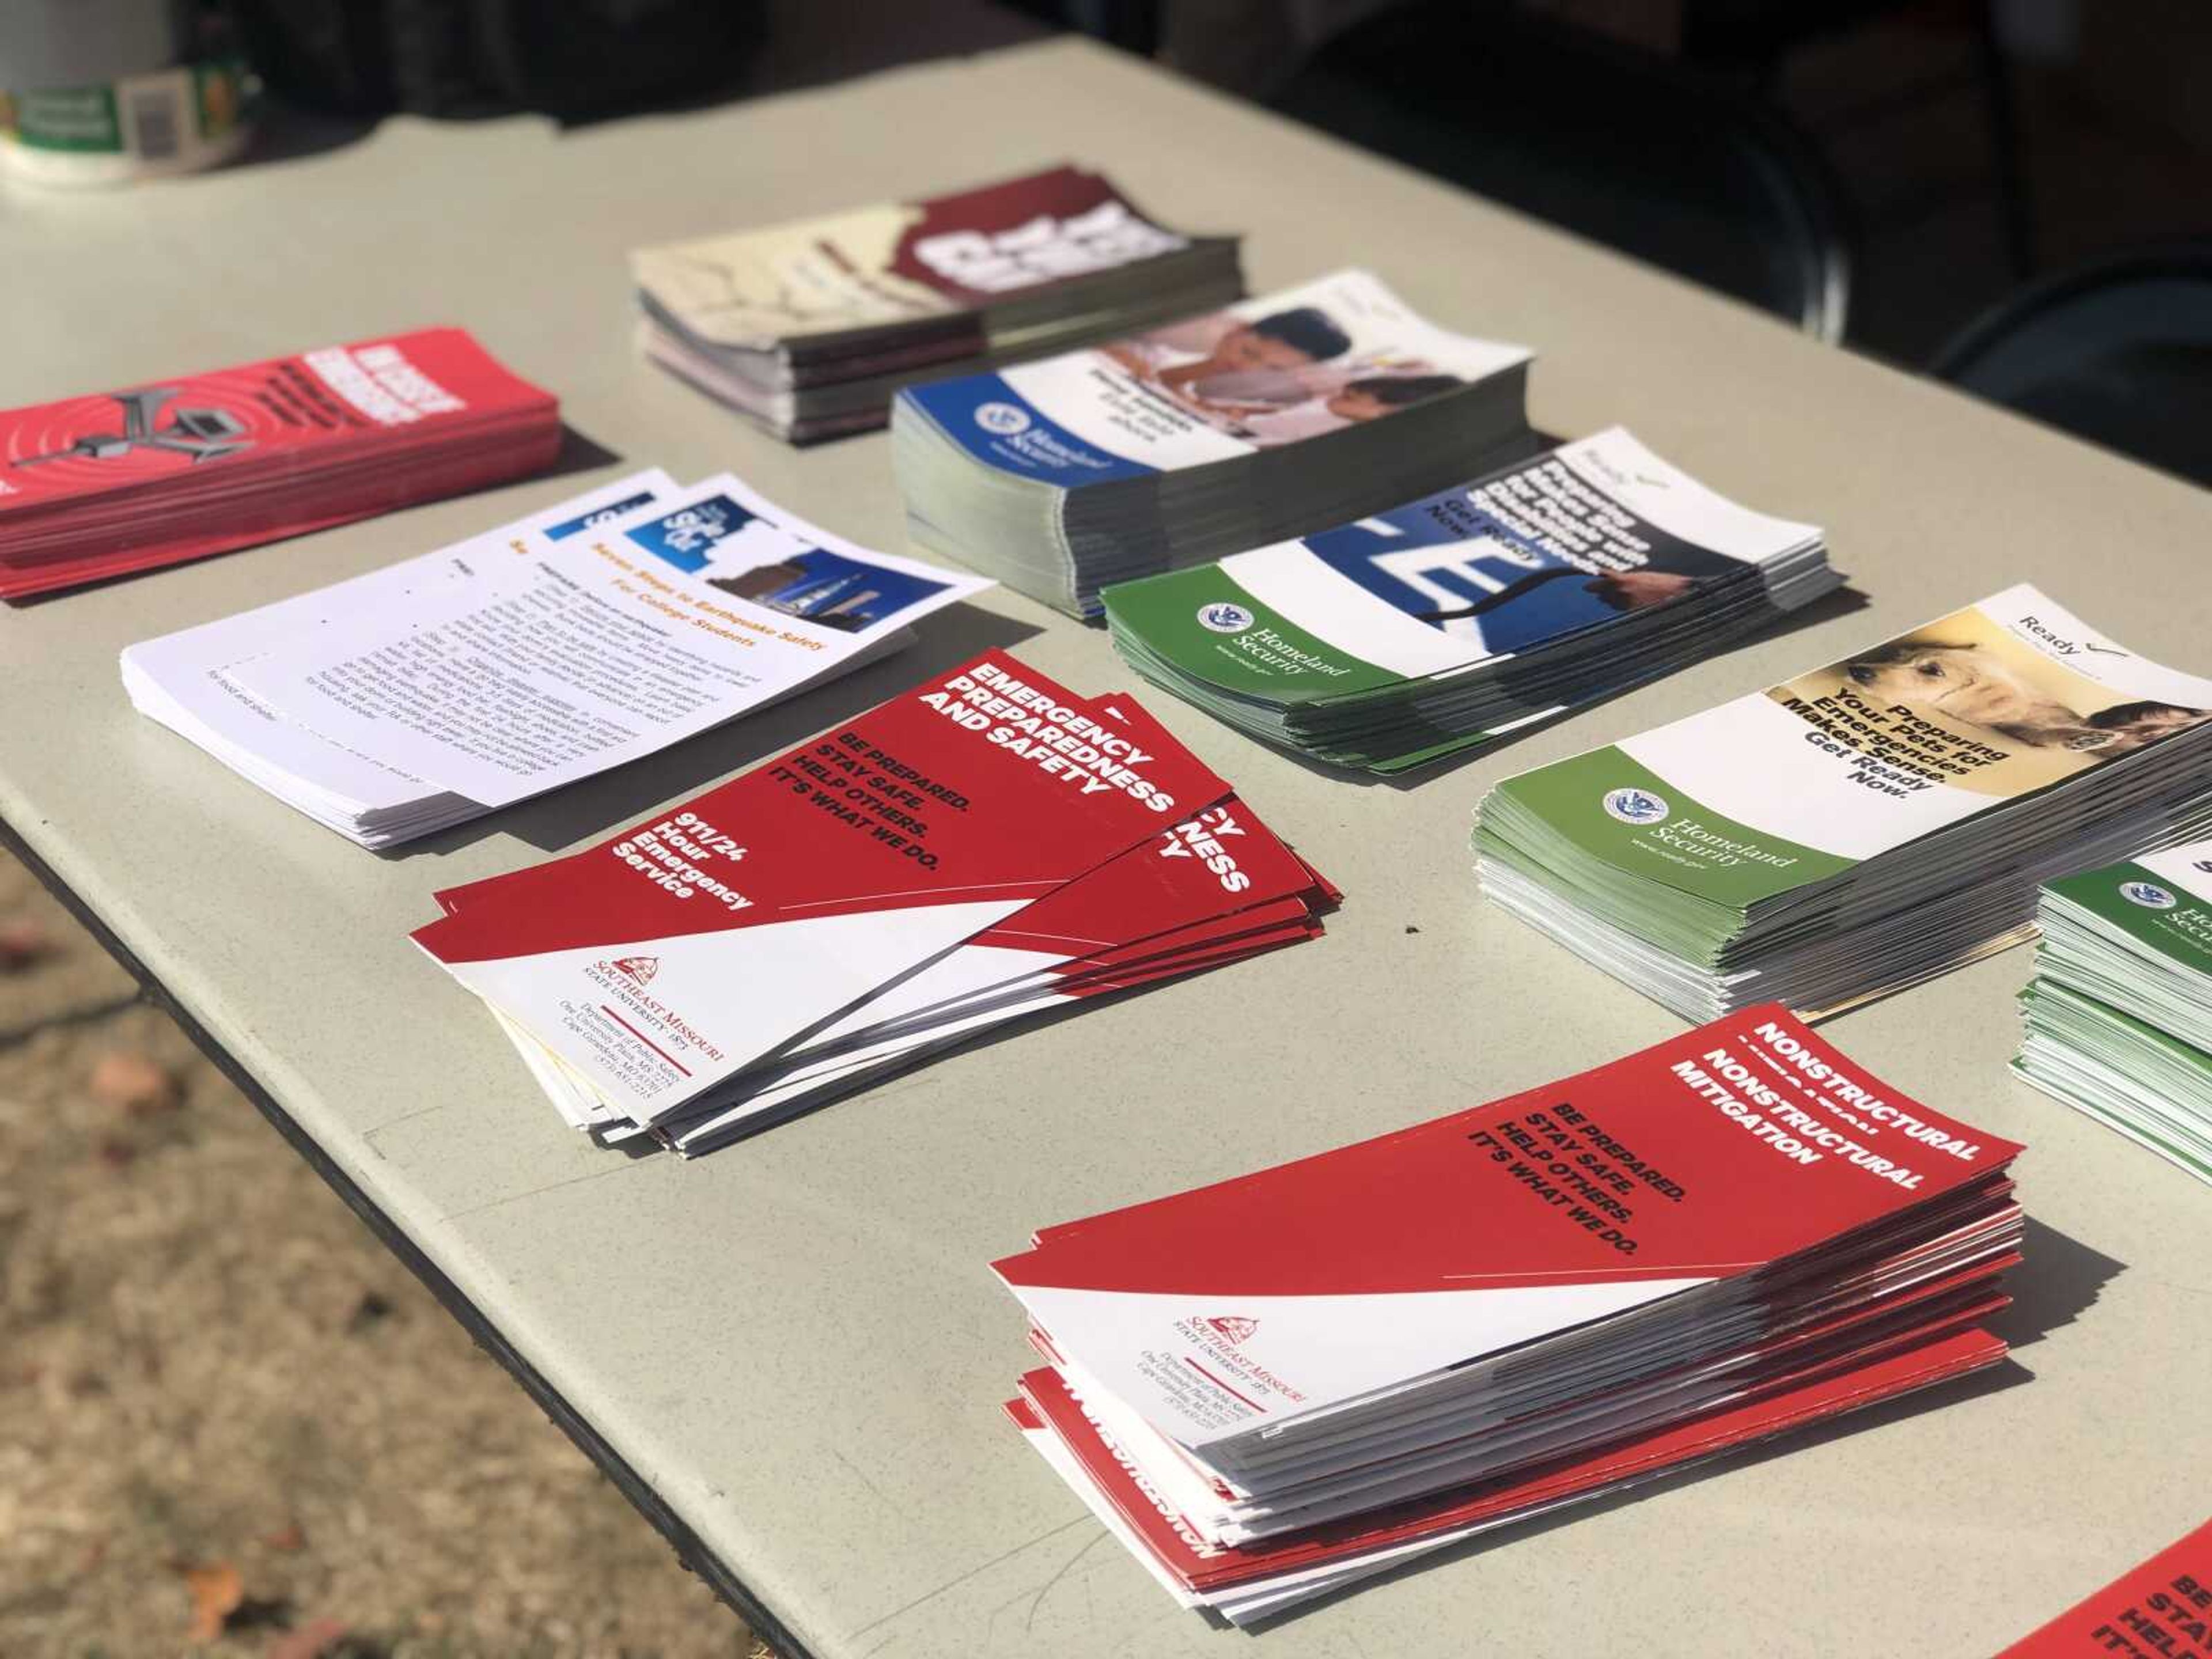 A variety of pamphlets regarding information about emergency events and other safety protocols were handed out on Wednesday, Sept. 18 in front of Kent Library in Cape Girardeau, Missouri.